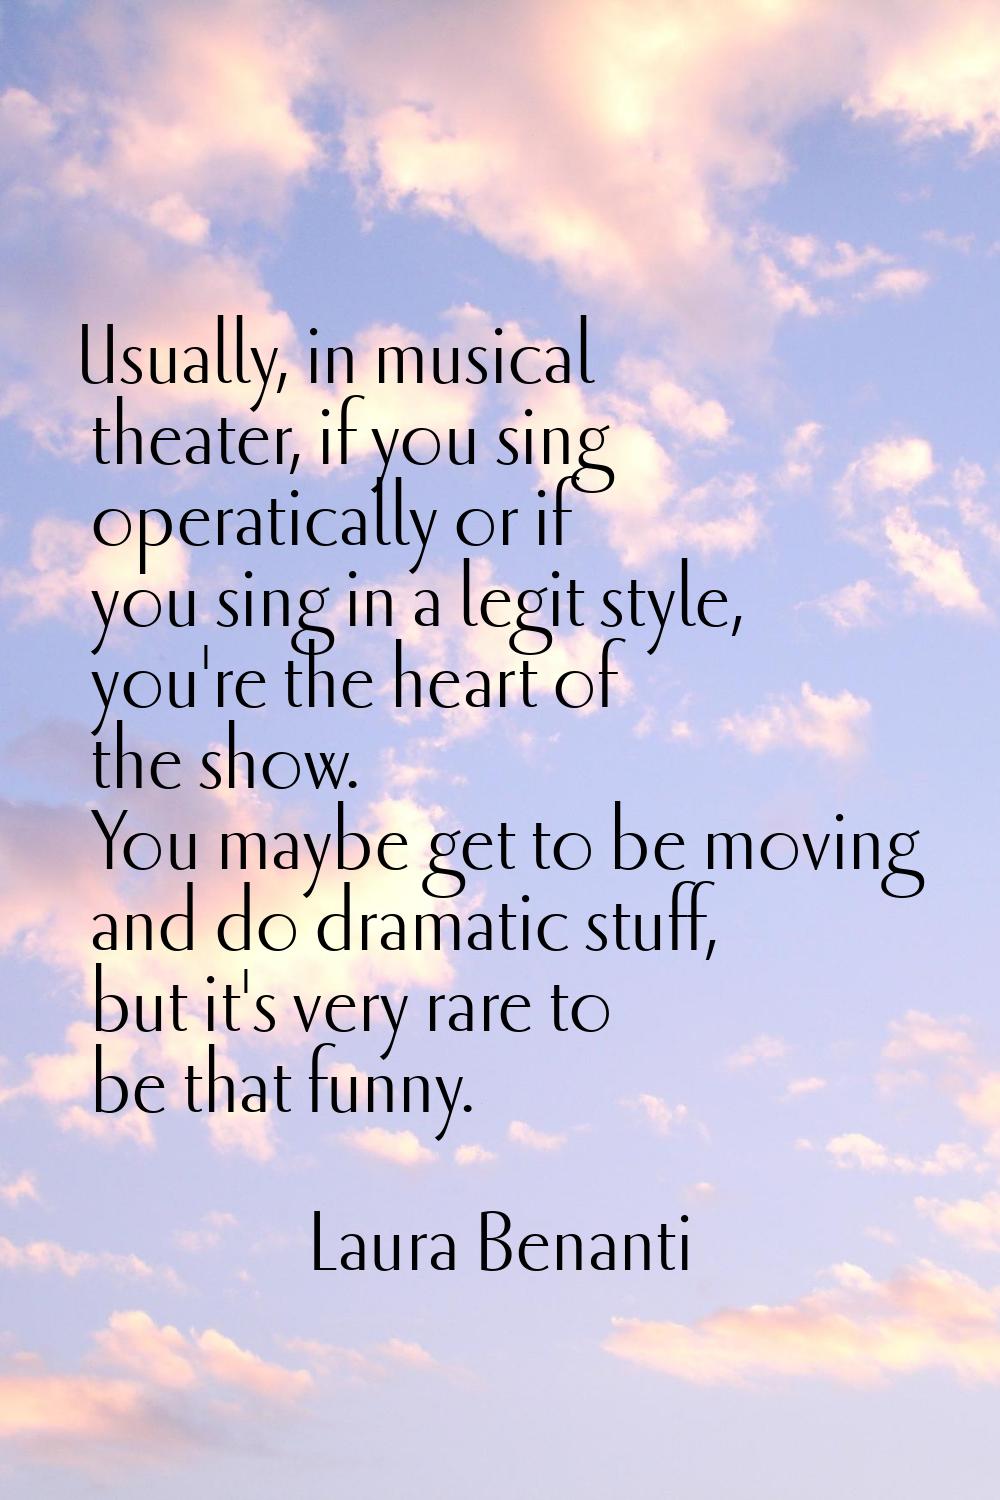 Usually, in musical theater, if you sing operatically or if you sing in a legit style, you're the h